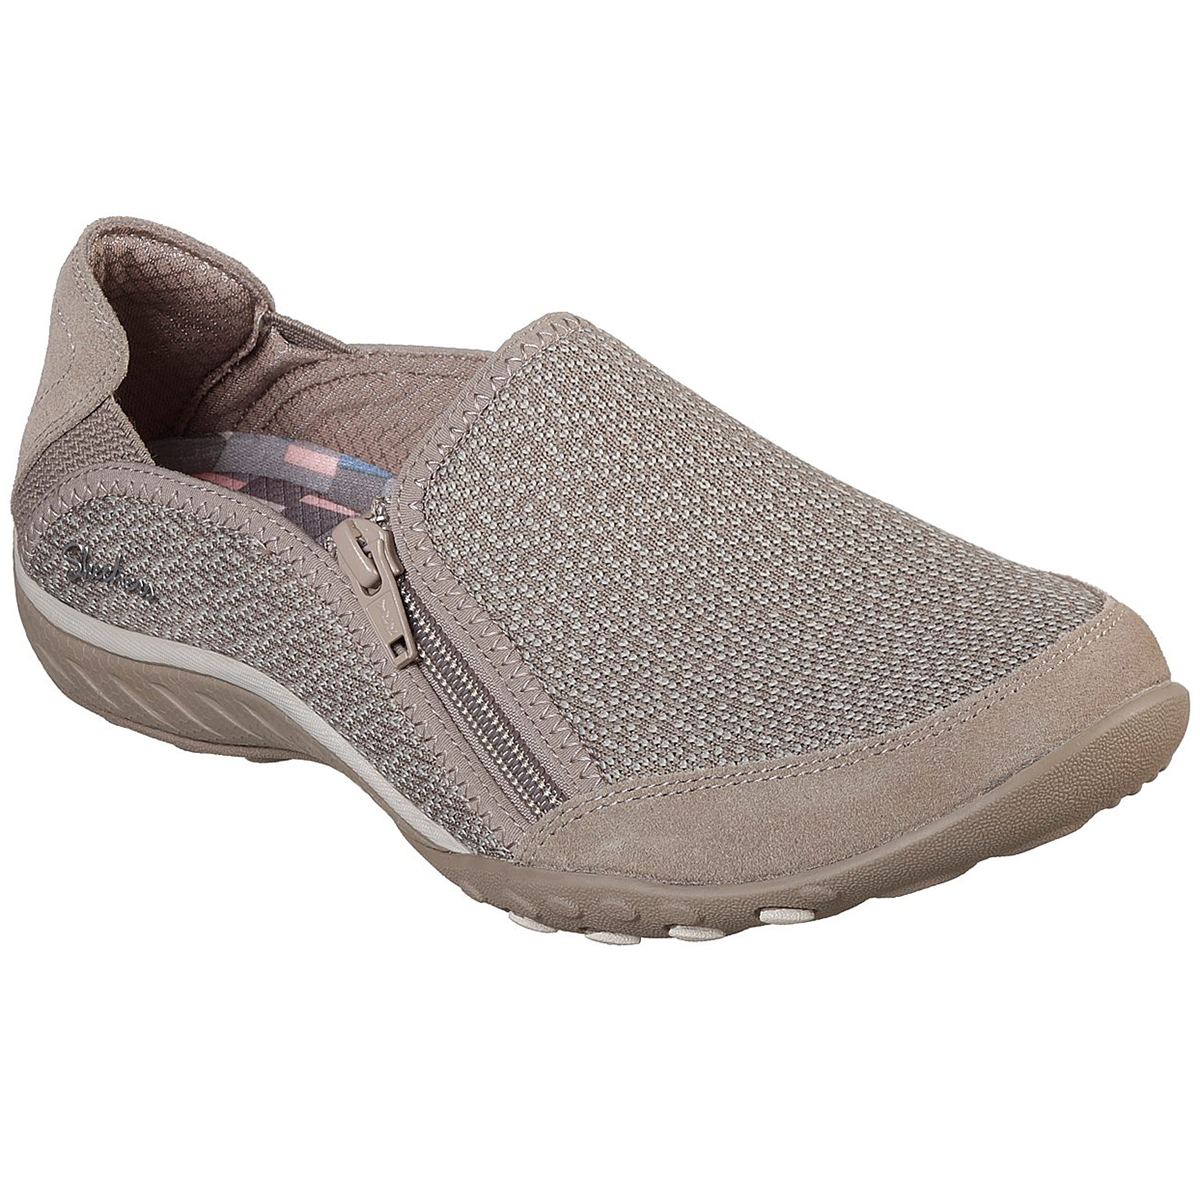 Skechers Women's Relaxed Fit: Breathe Easy - Quiet-Tude Sneakers - Brown, 6.5